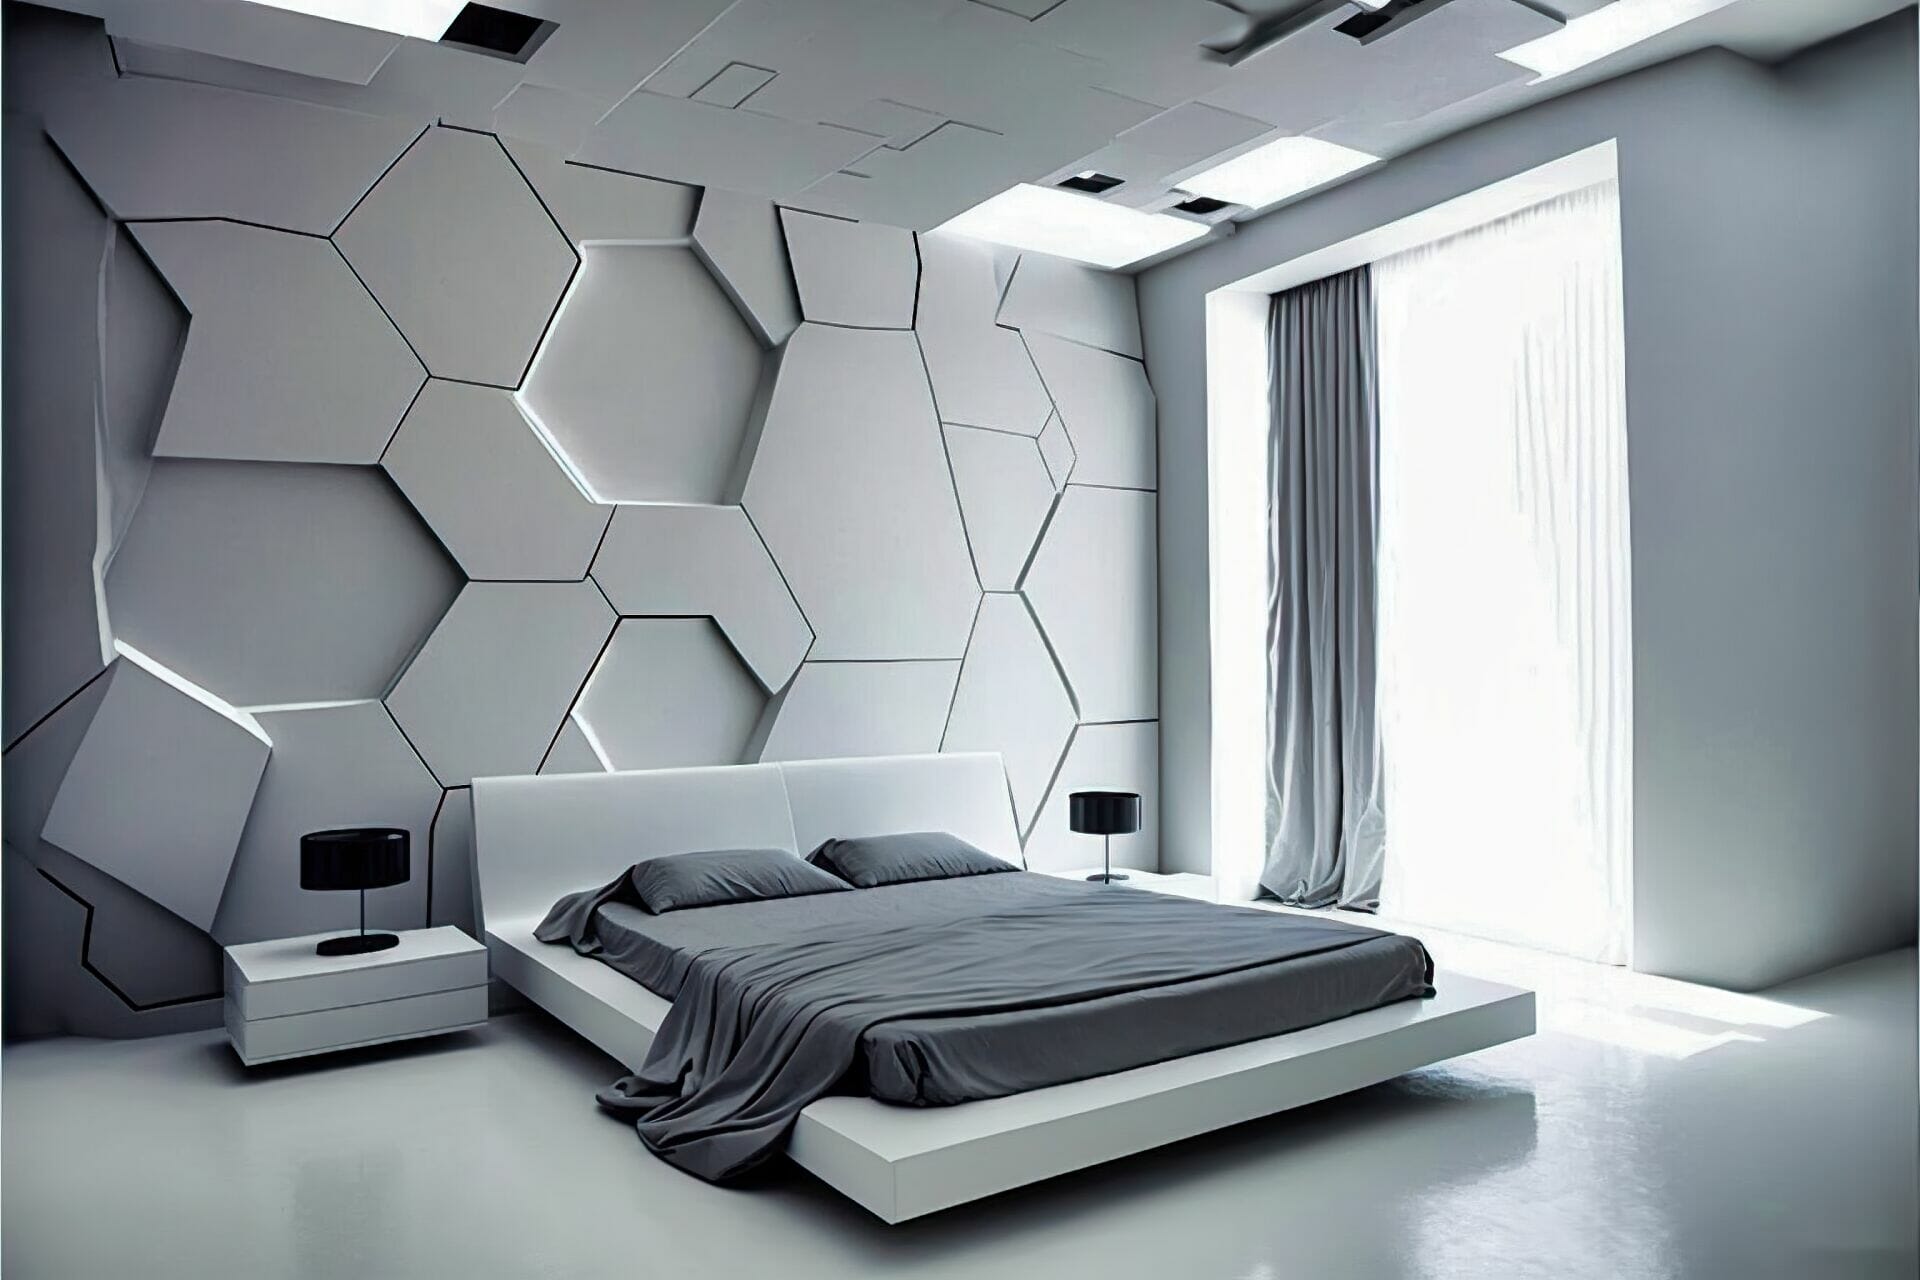 Futuristic Style Bedroom With Minimalistic Touches: This Bedroom Features A Sleek White Bed, Minimalistic Furniture Pieces, And A Variety Of White And Grey Accents. The Walls And Ceiling Are Painted A Bright White, And The Floor Is Made Up Of Sleek Grey Tiles.